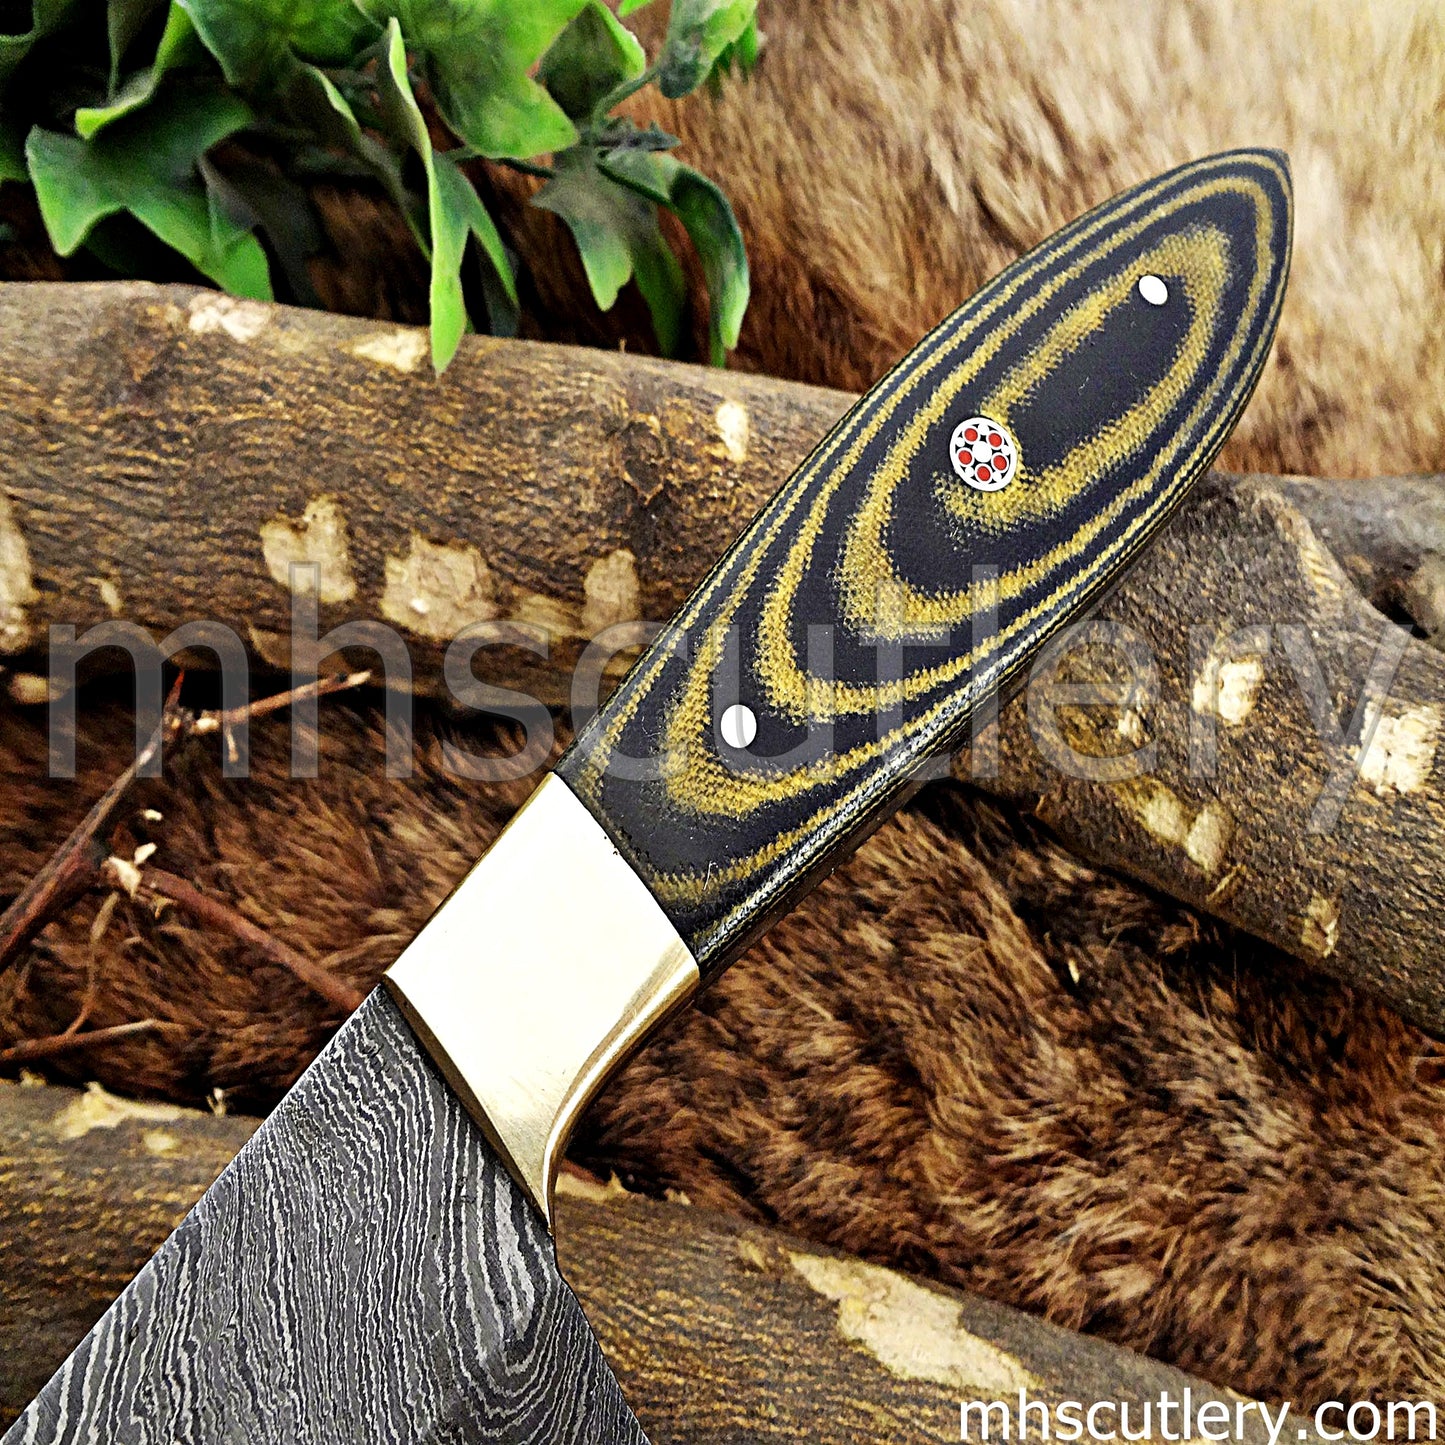 Hand Forged Damascus Steel Chef Knife / Micarta Handle | mhscutlery